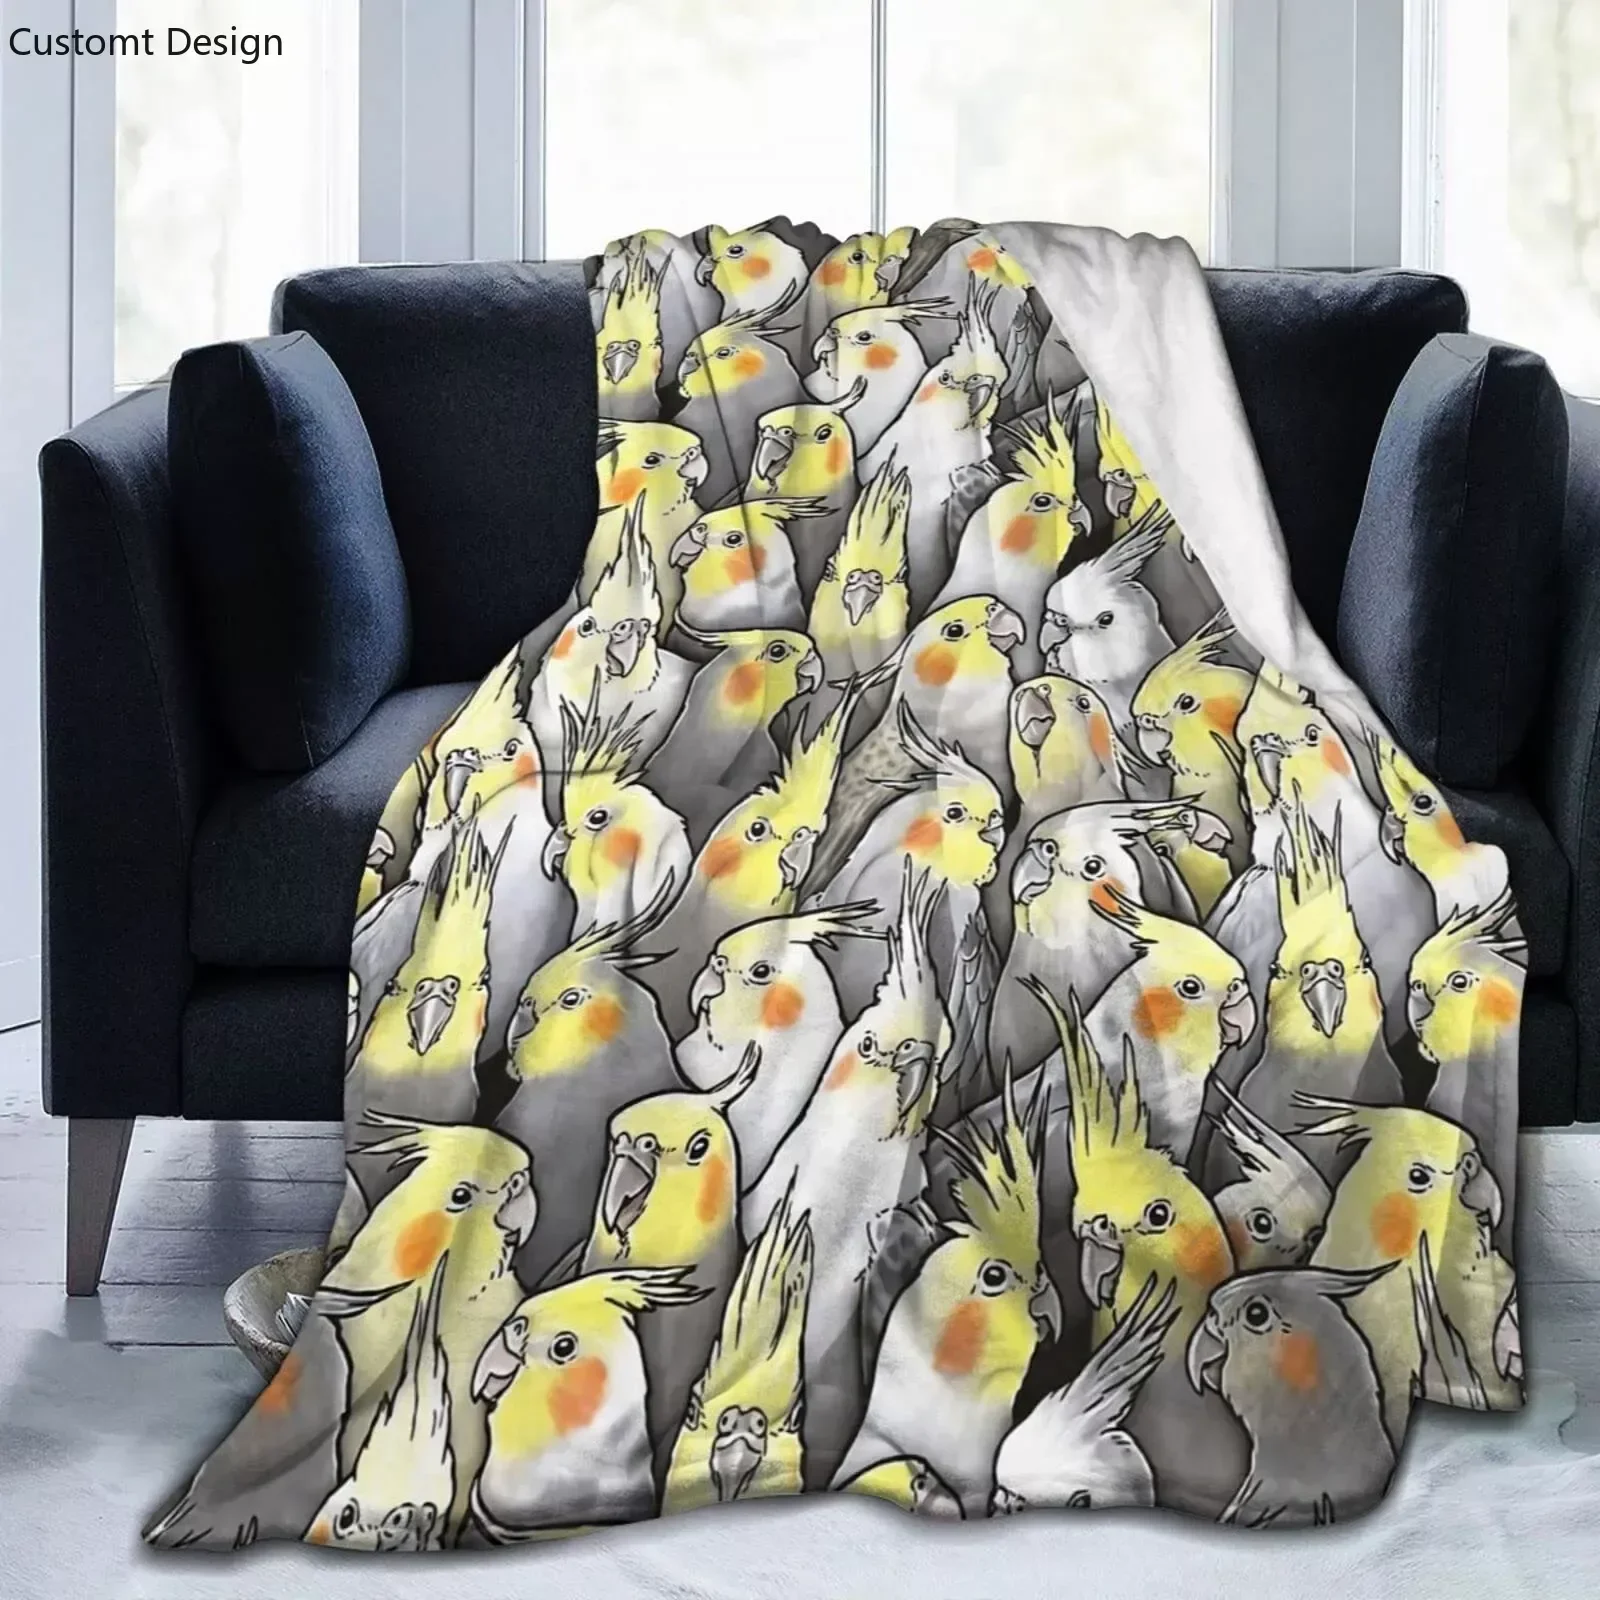 

Cartoon Cockatiel Flannel Blanket Soft Cozy Warm Parrot Throw Blanket for All Seasons Bedspread Bedding for Bed Sofa Couch Decor